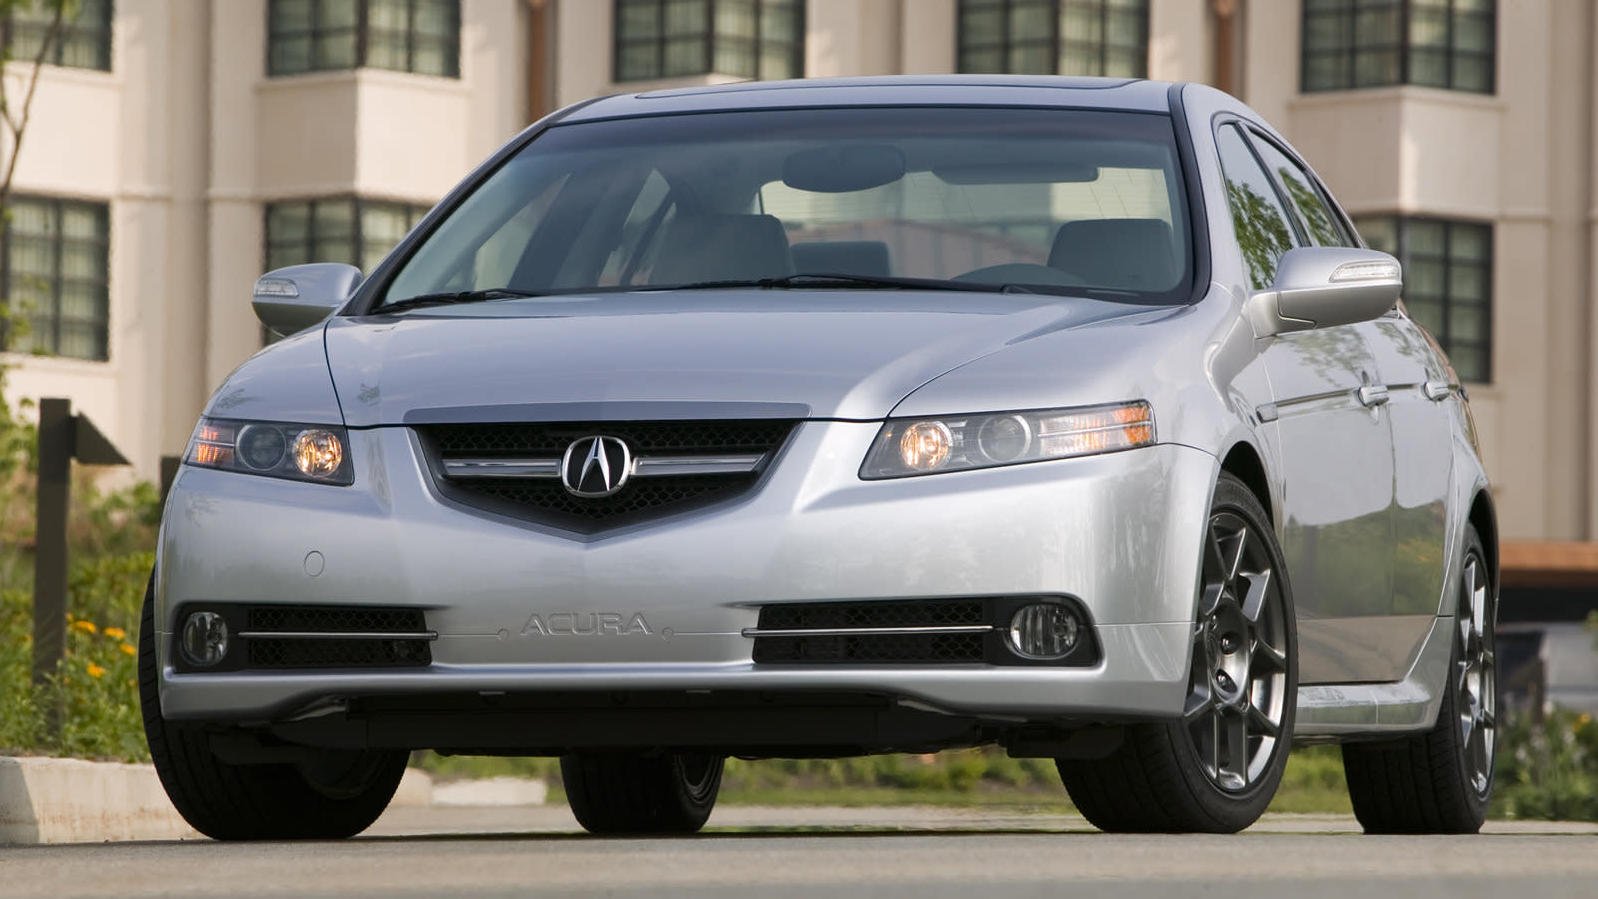 Let’s Compare The New Acura TLX Type S With Its Legendary TL Type S Predecessor